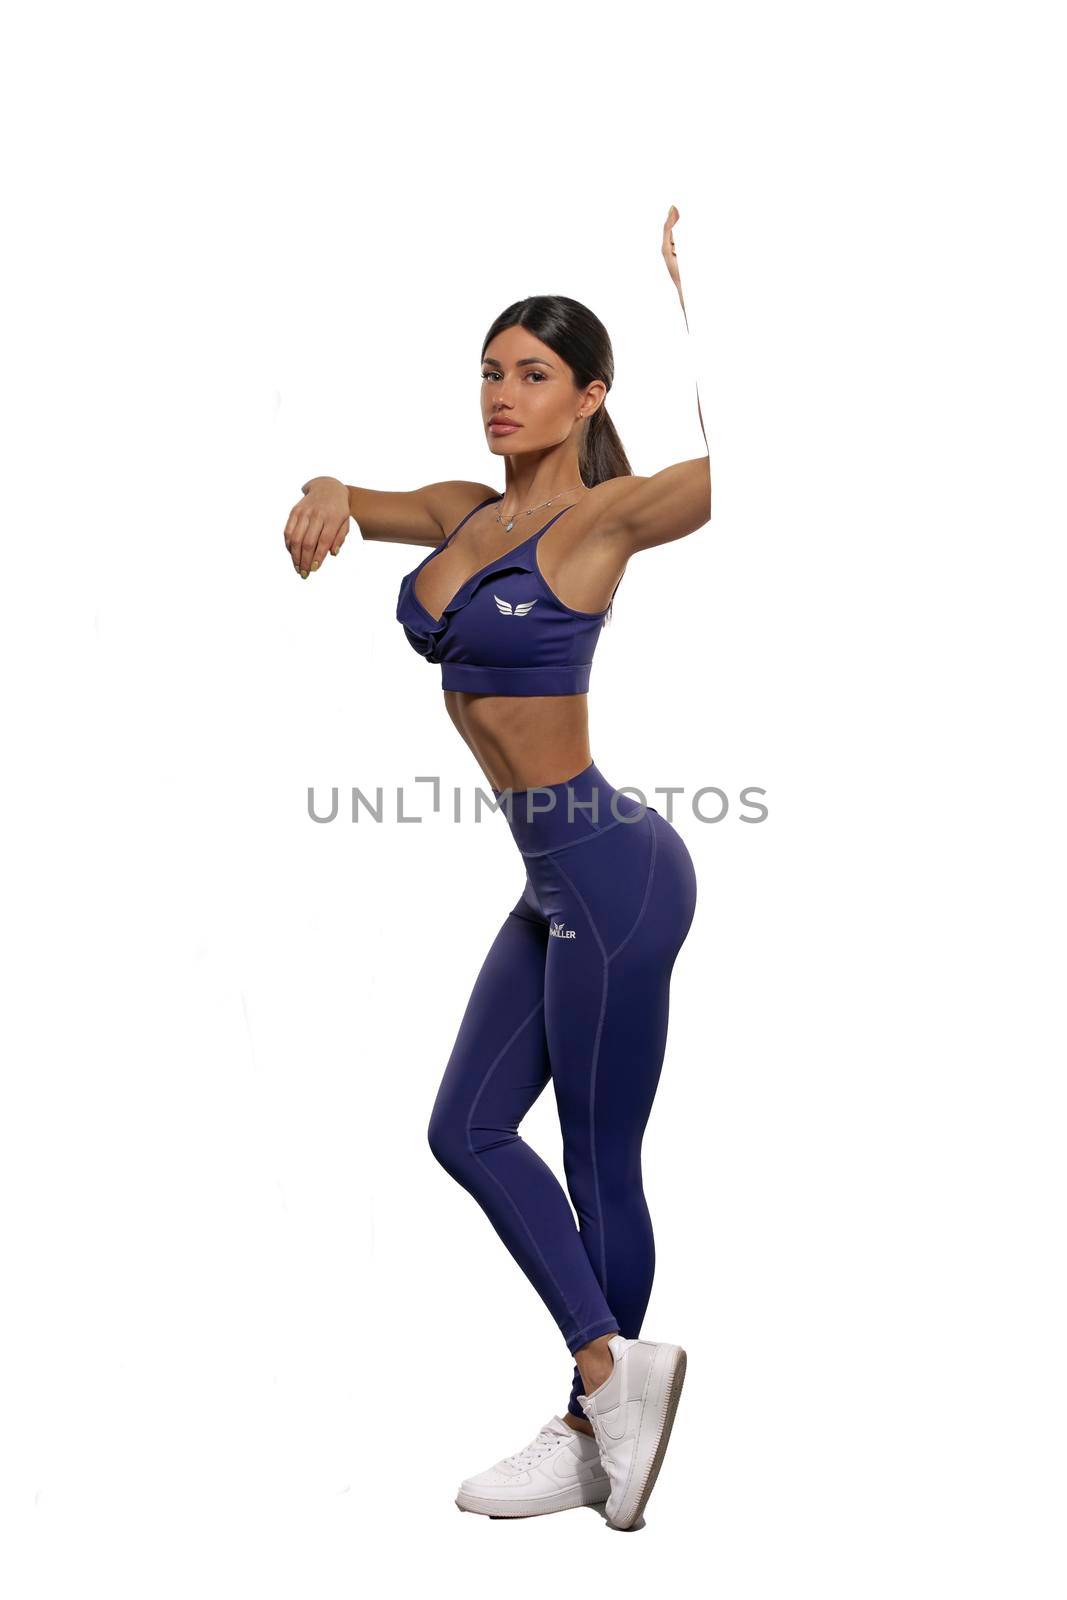 girl in blue leggings and top on a white background by but_photo